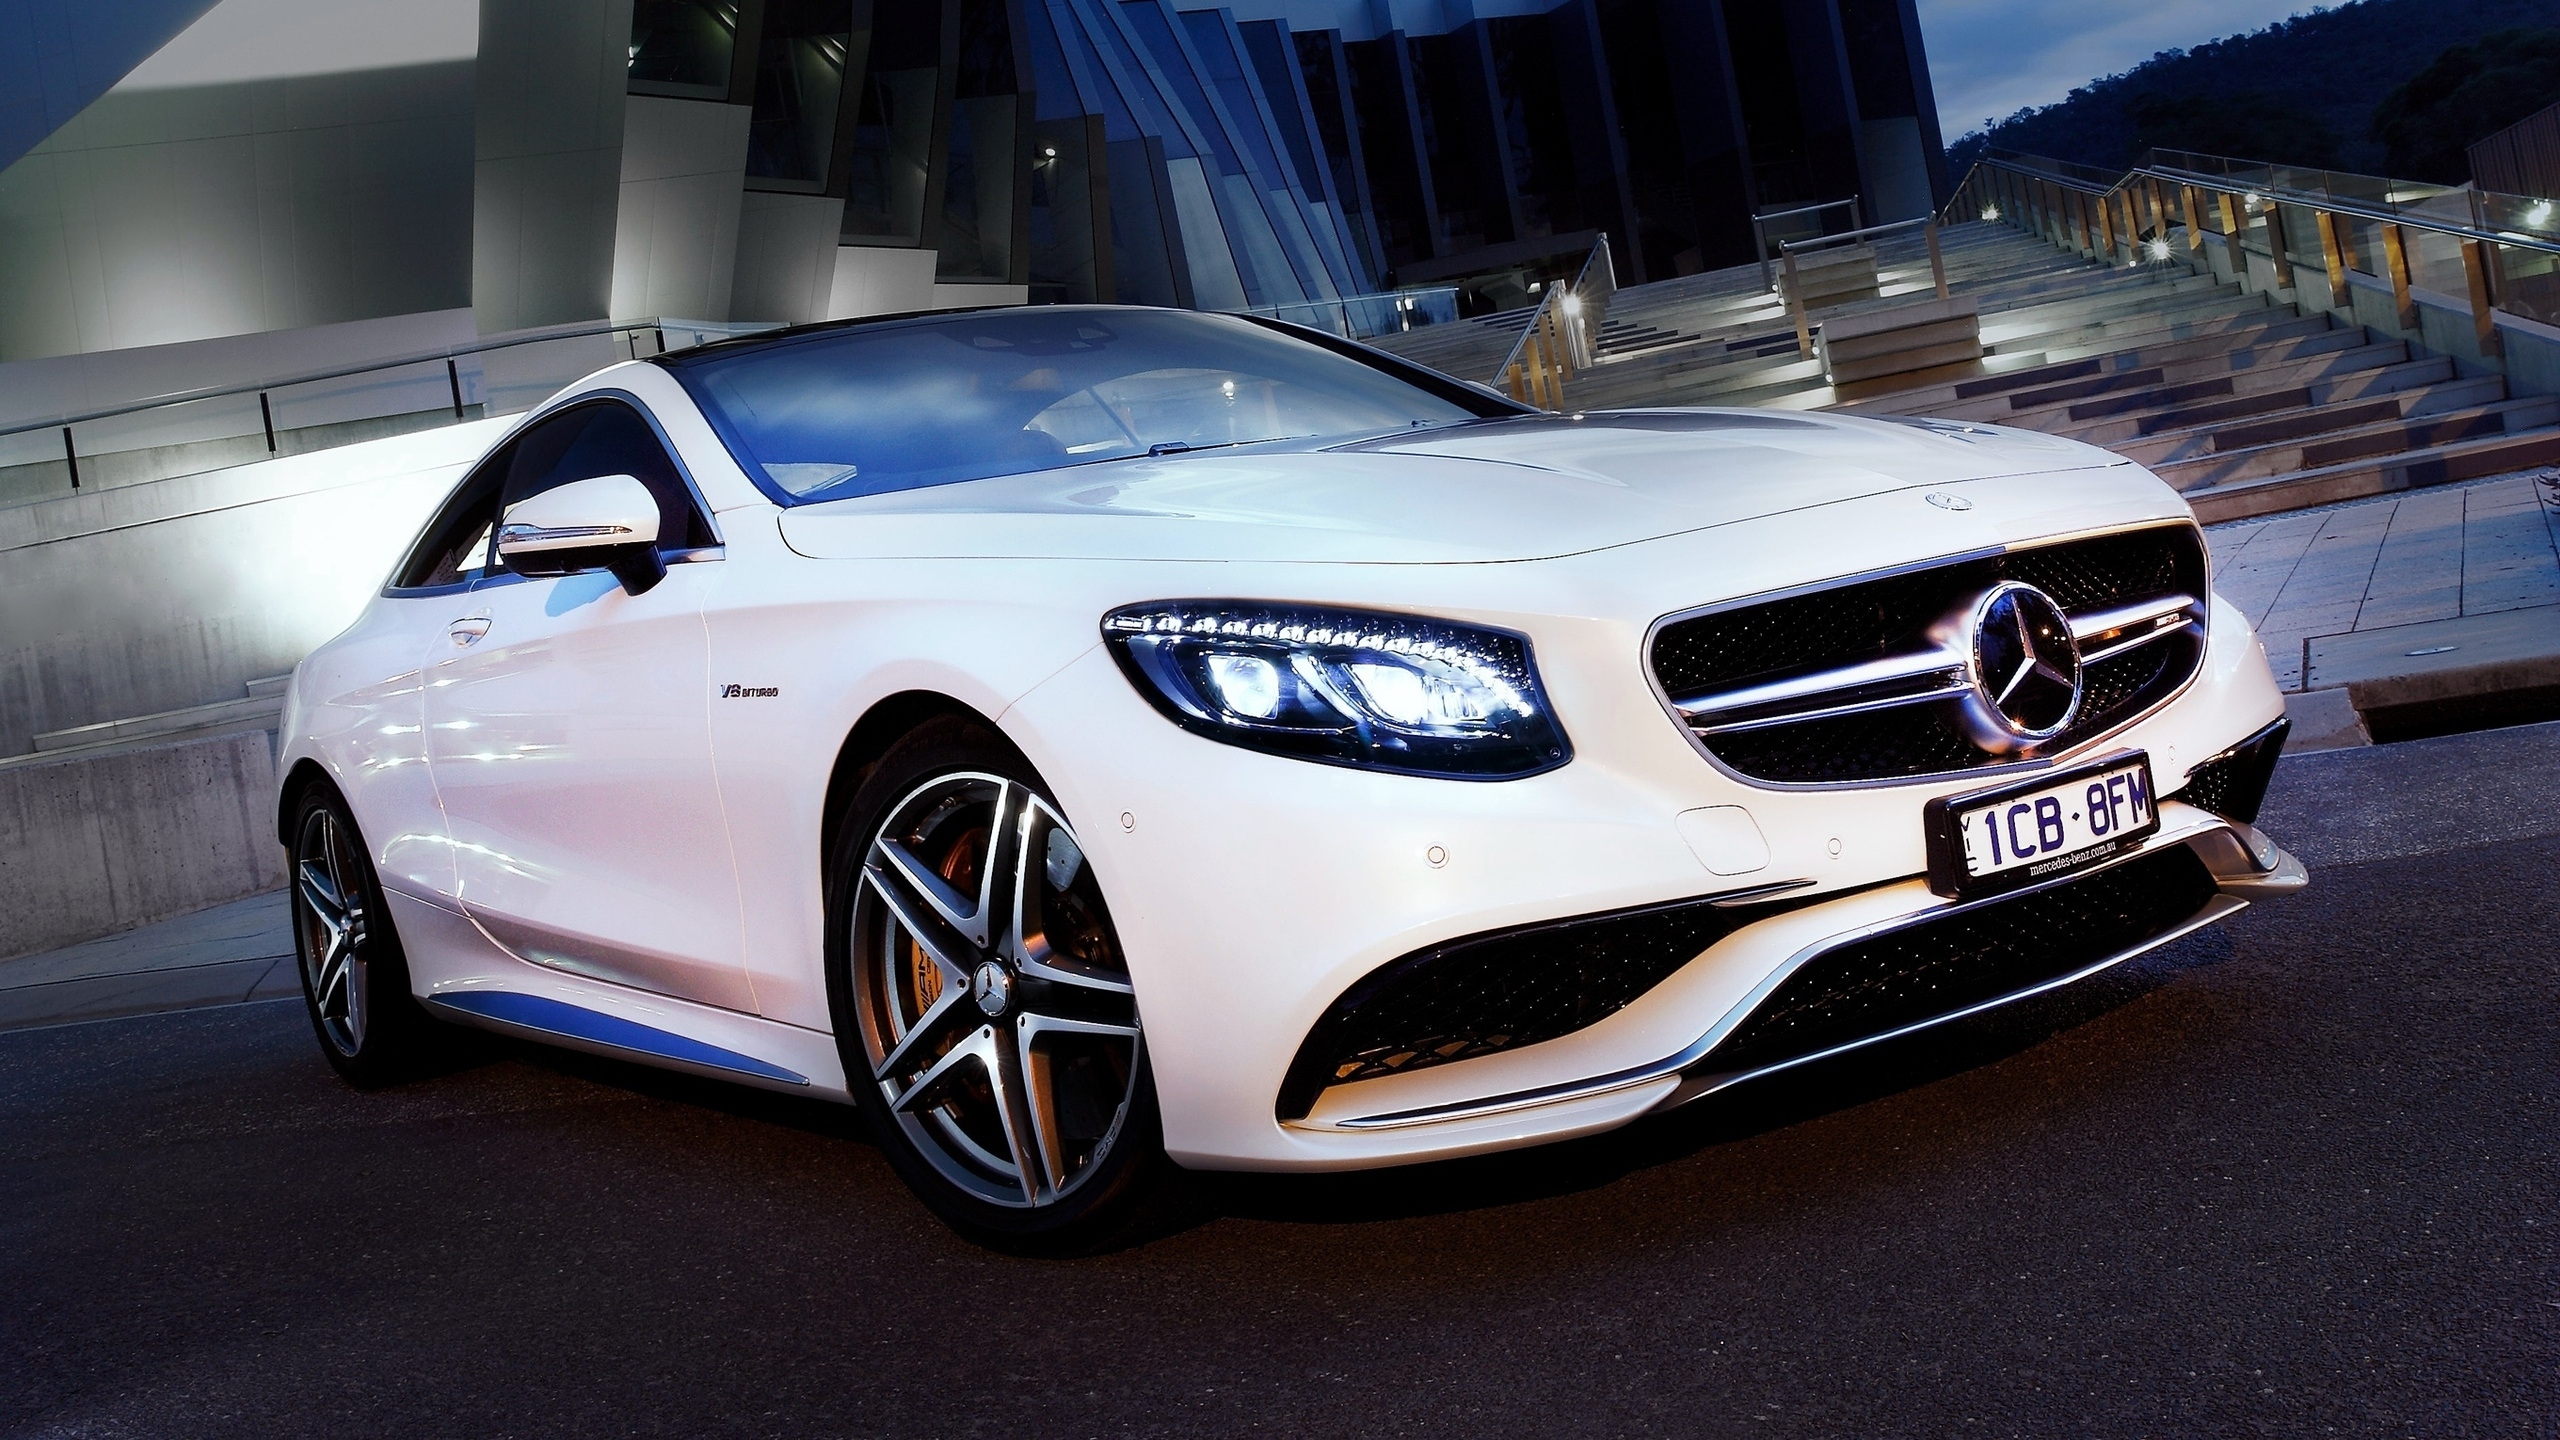 Mercedes Benz S63 AMG 2015 for 2560x1440 HDTV resolution